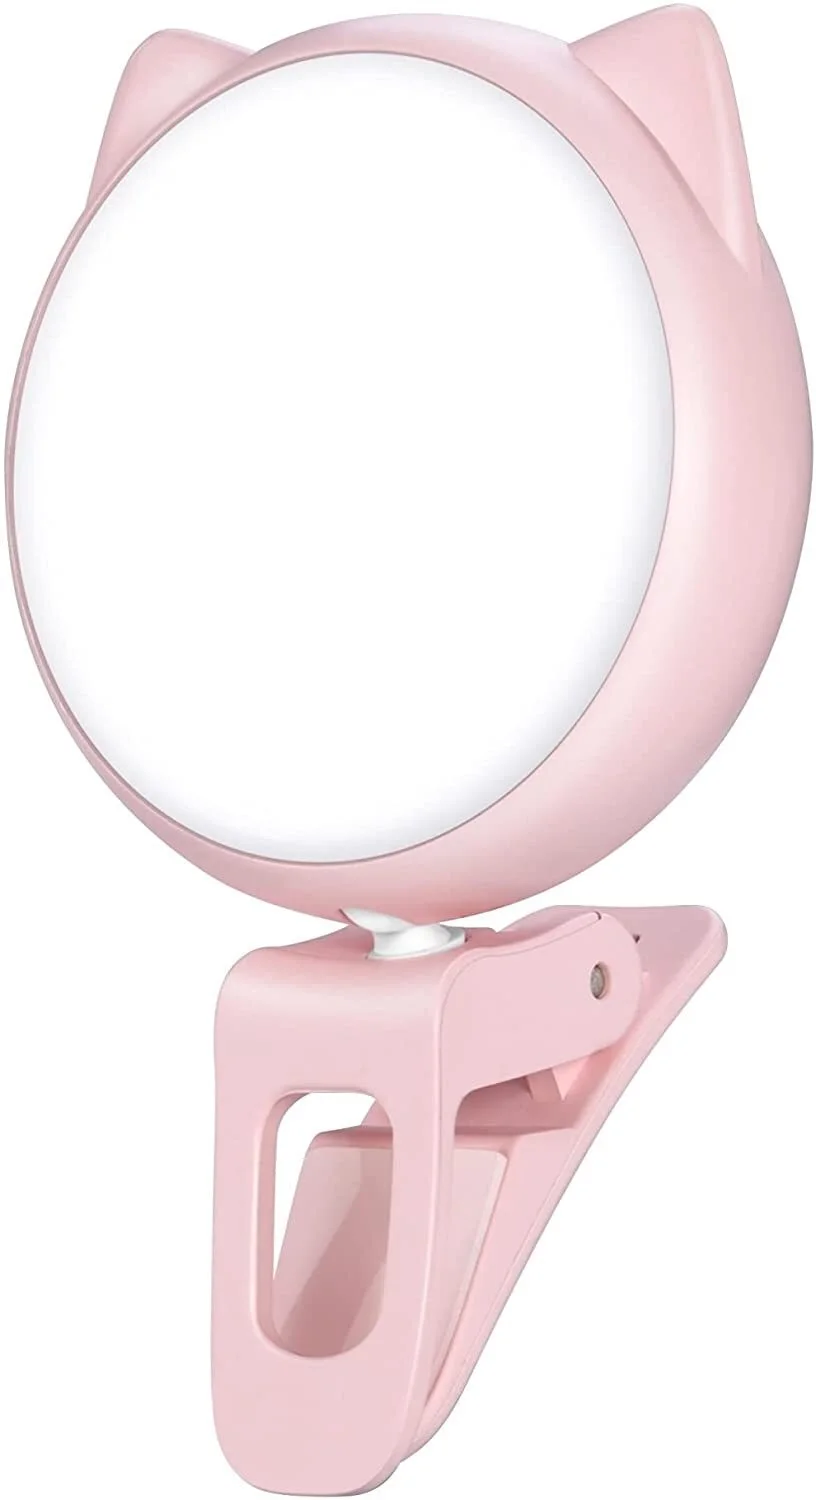 

Selfie Clip on Ring Light, Mini Rechargeable 9 Level Adjustable Brightness Light with 32 LED, 2-8 Hours, USB Flash Lighting for